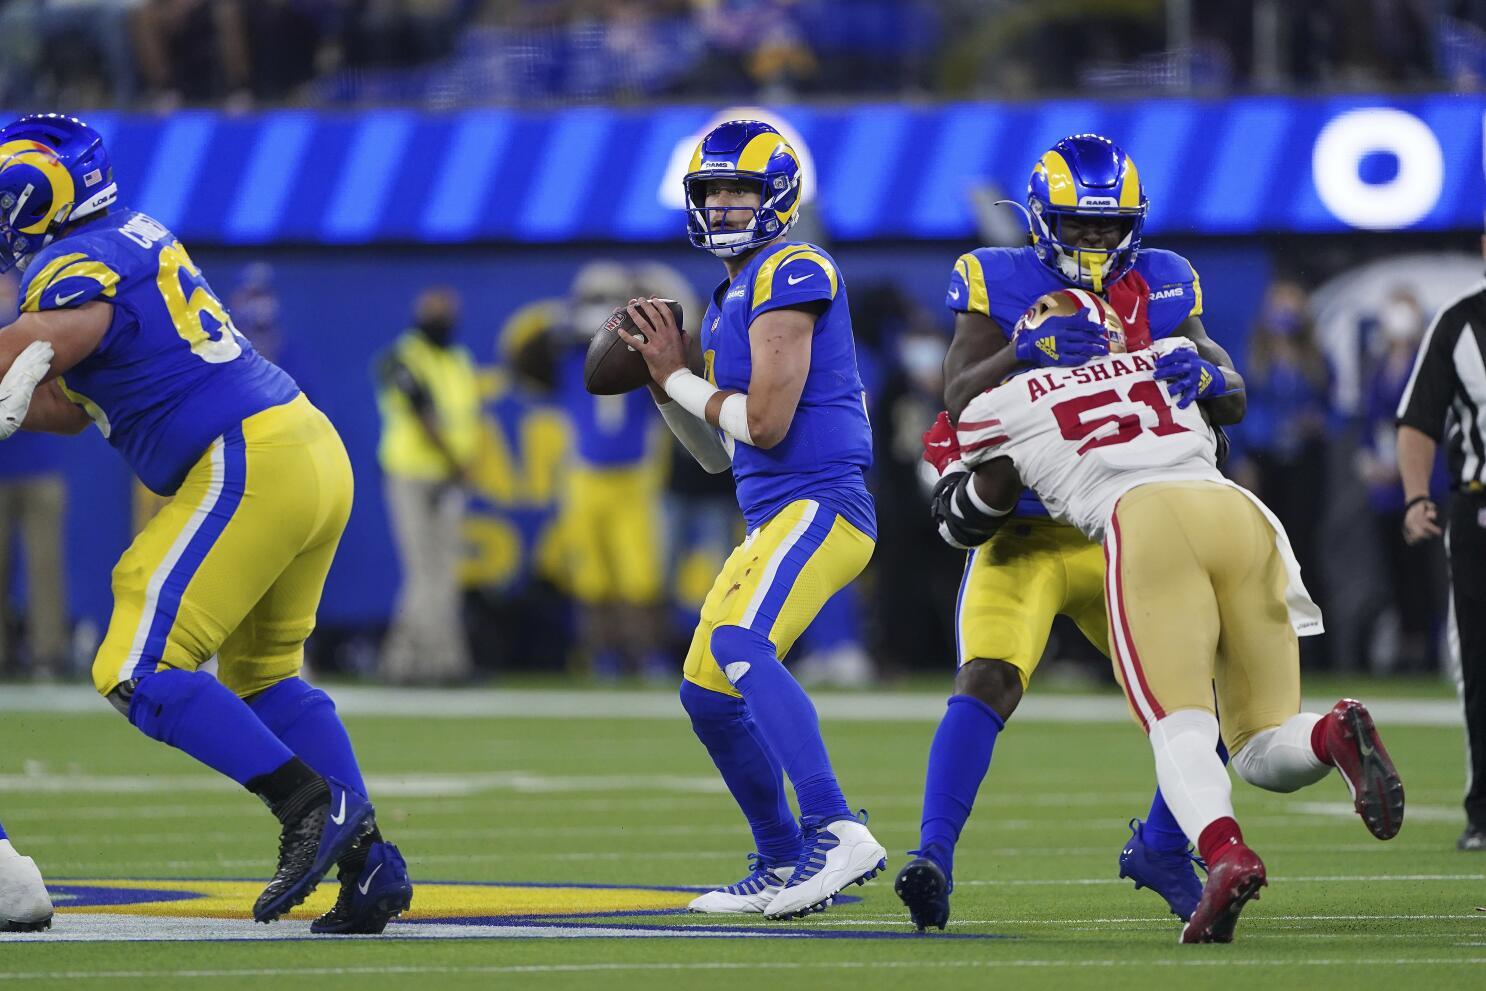 TV Ratings: Rams-49ers NFC Championship Scores 50 Million Viewers